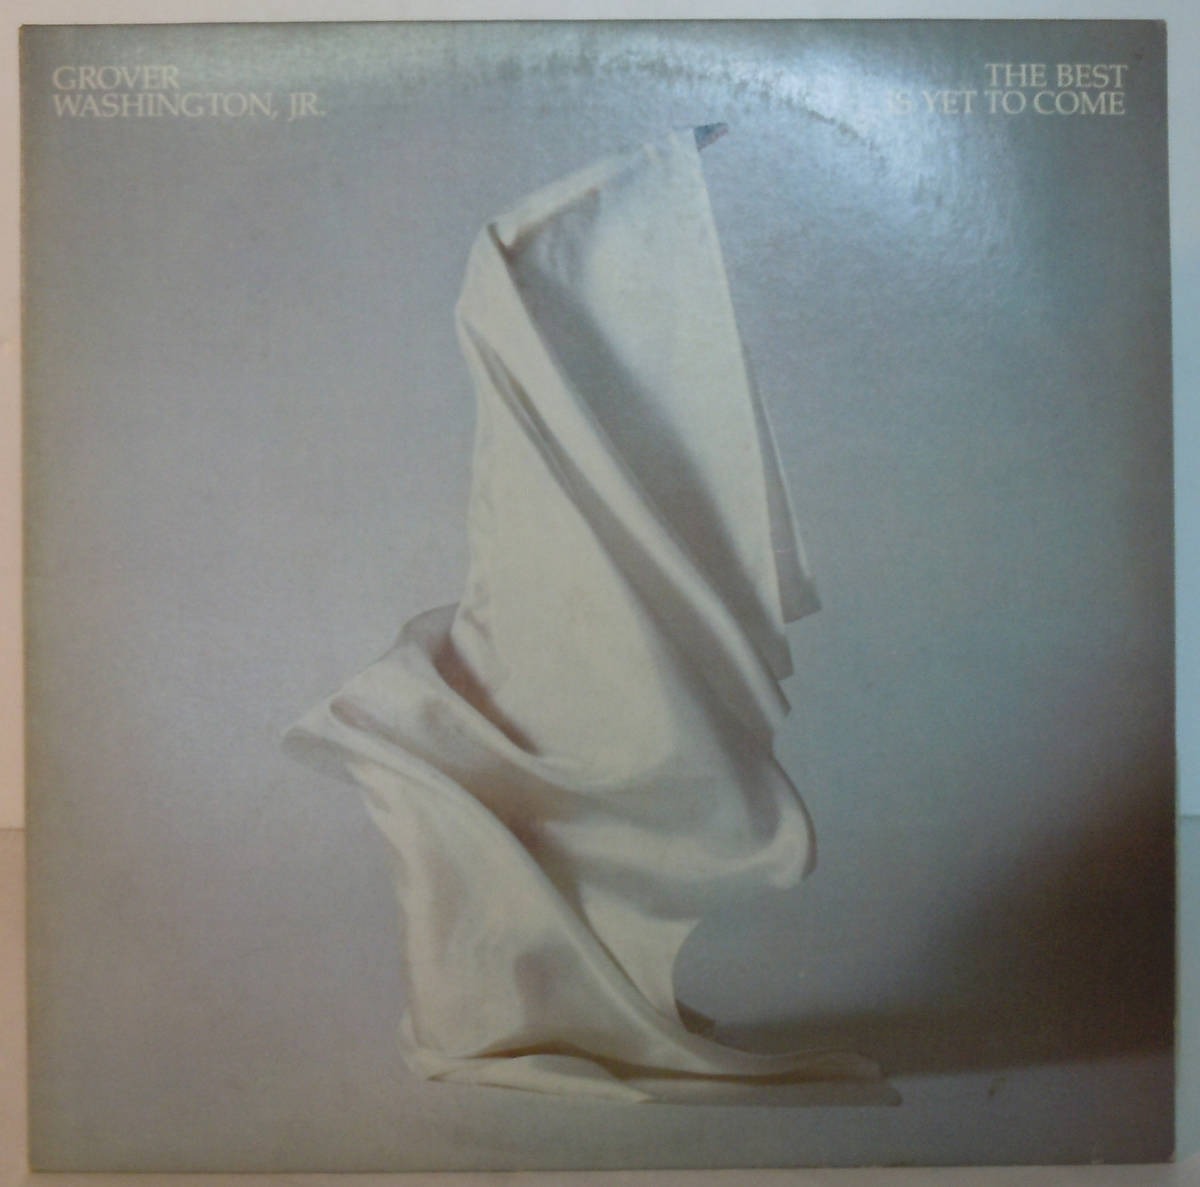 90810S 12LP★GROVER WASHINGTON,JR./THE BEST IS YET TO COME★P-11307 _画像1